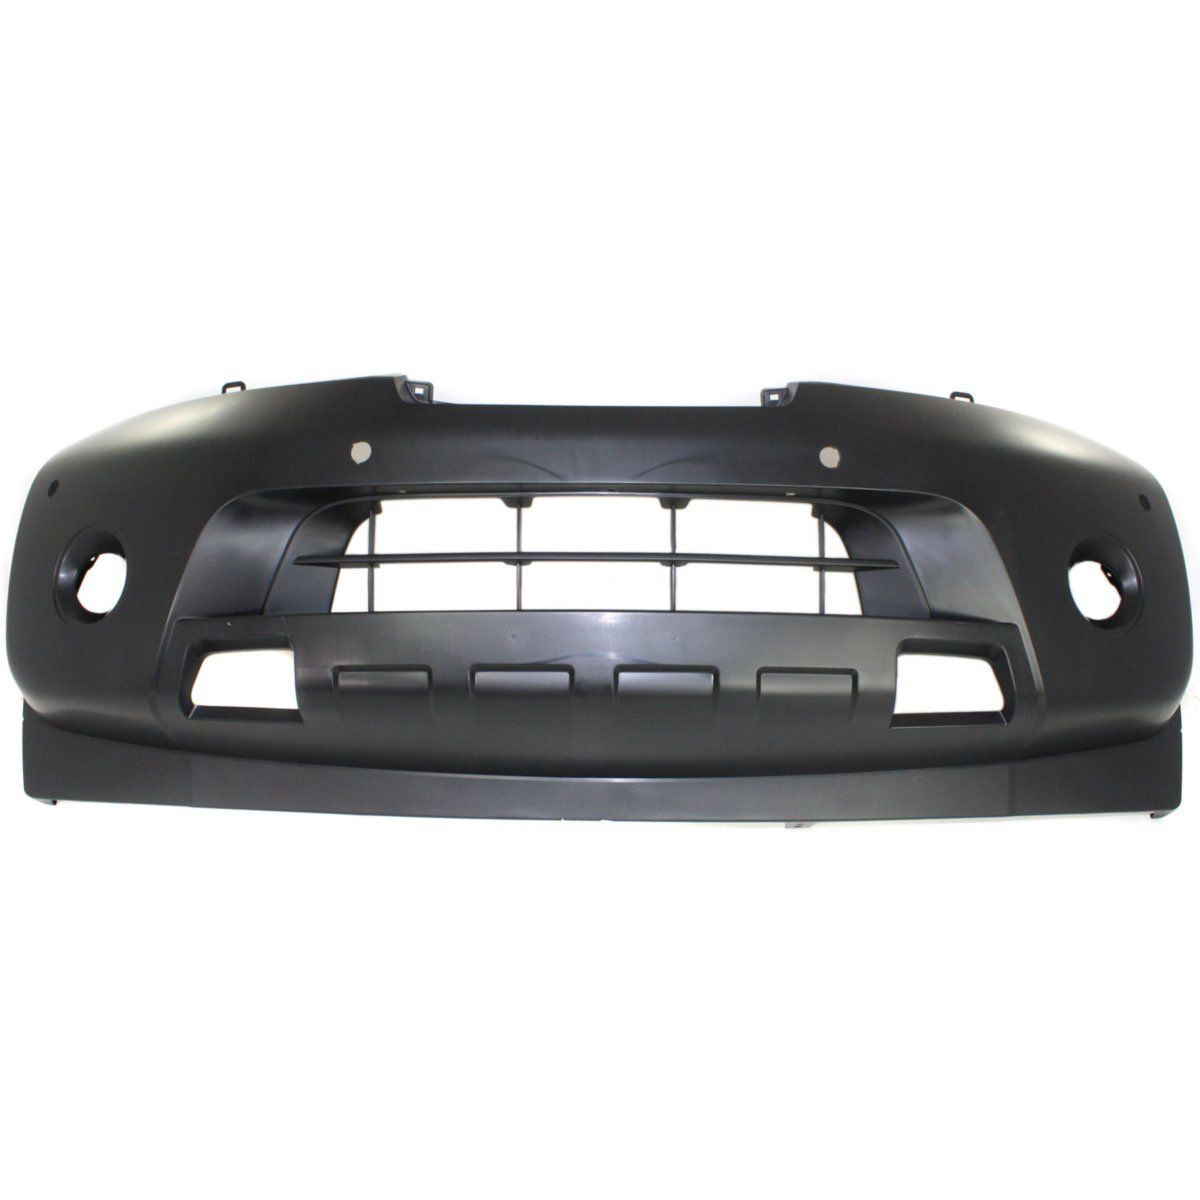 2008-2015 NISSAN TITAN Front Bumper Cover w/distance sensors Painted to Match